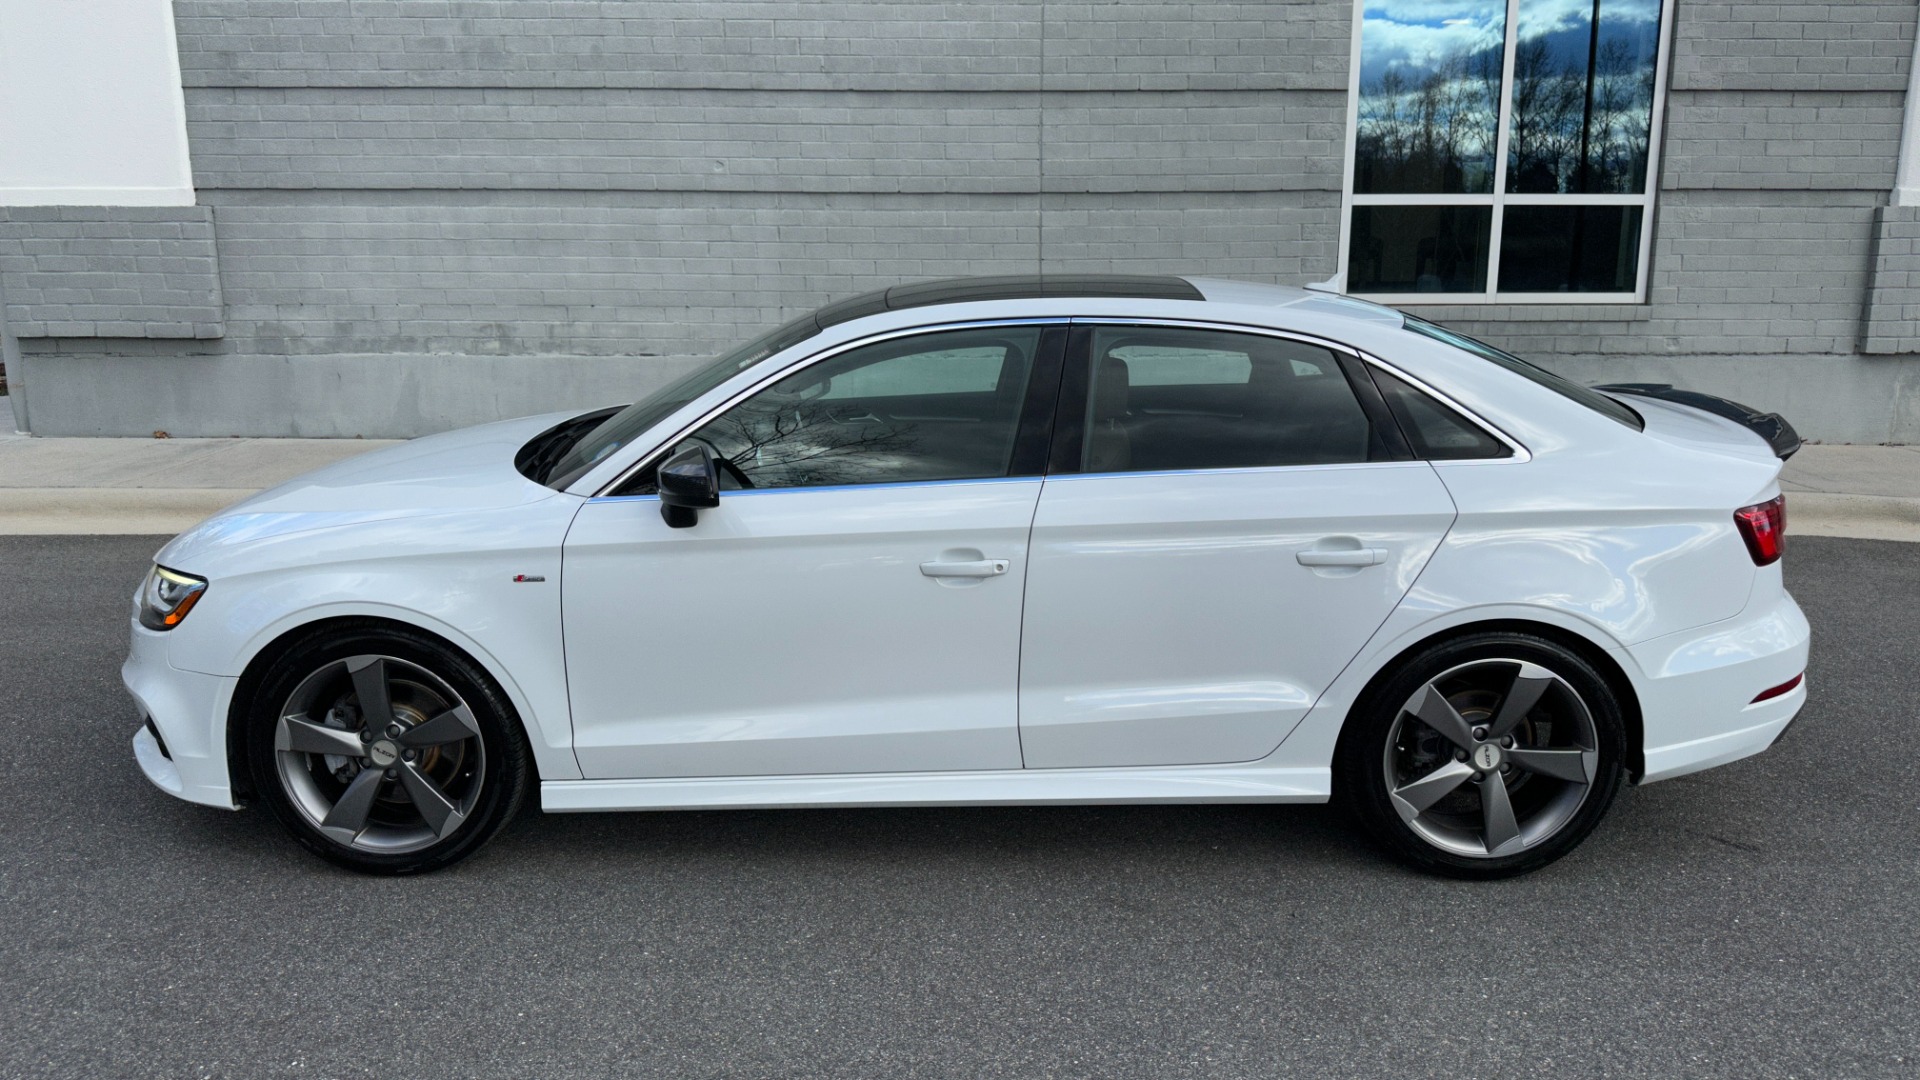 Used 2017 Audi A3 Sedan PREMIUM PLUS / SPORT PACKAGE / LIGHT PACKAGE / SPORT SUSPENSION / B&O SOUND for sale $21,995 at Formula Imports in Charlotte NC 28227 3